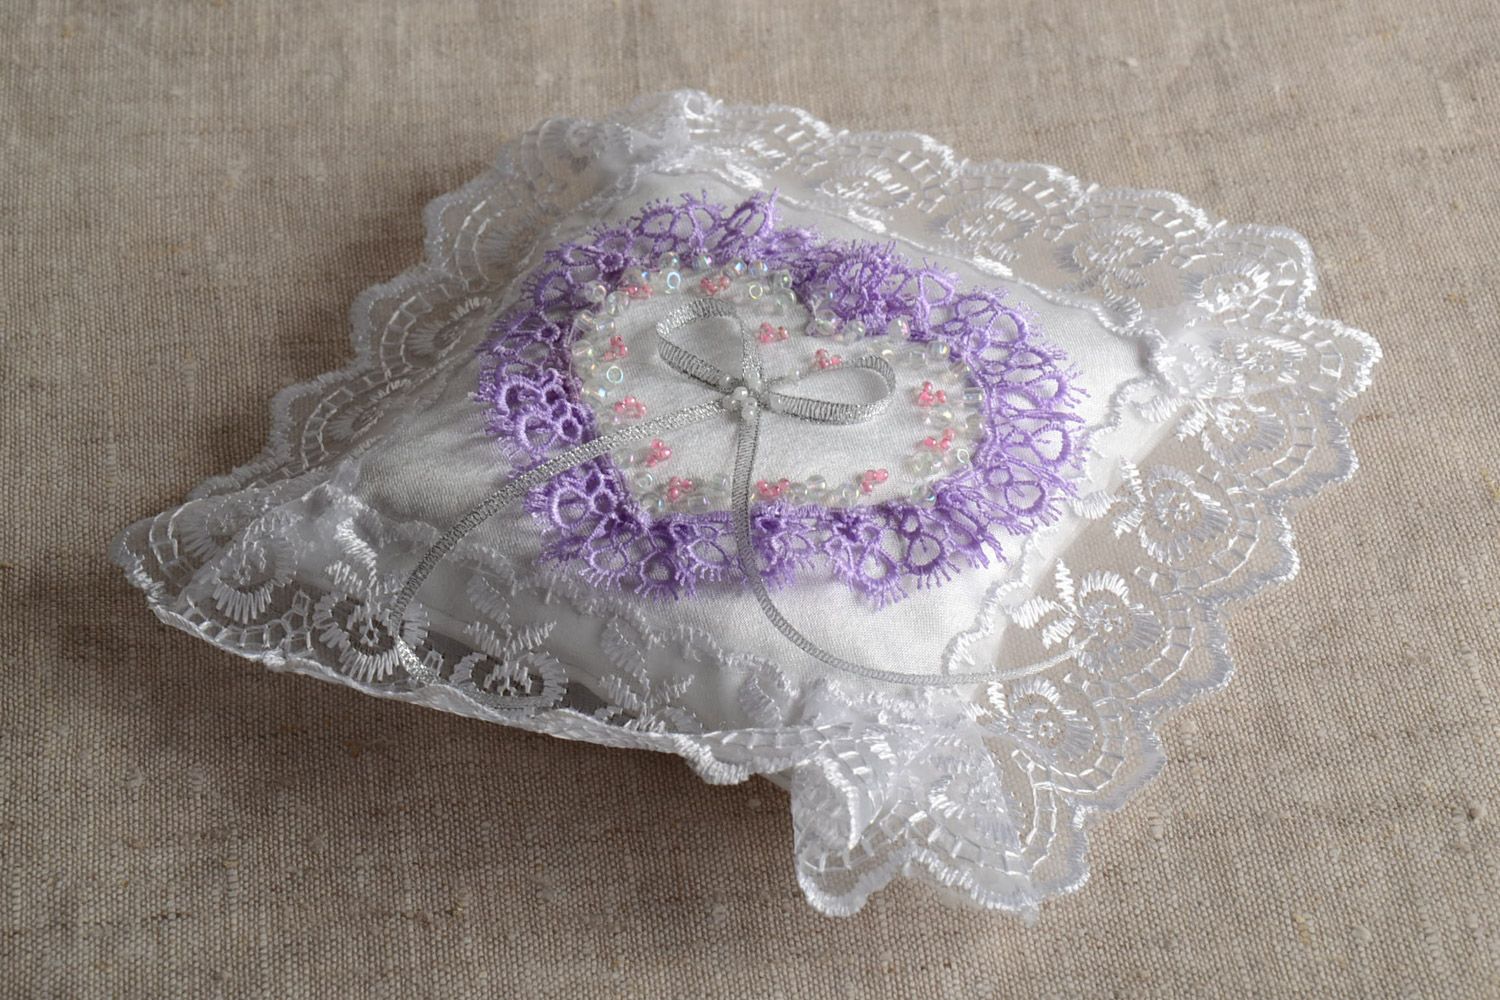 Handmade white satin rings bearer pillow with lace violet heart and beads photo 1